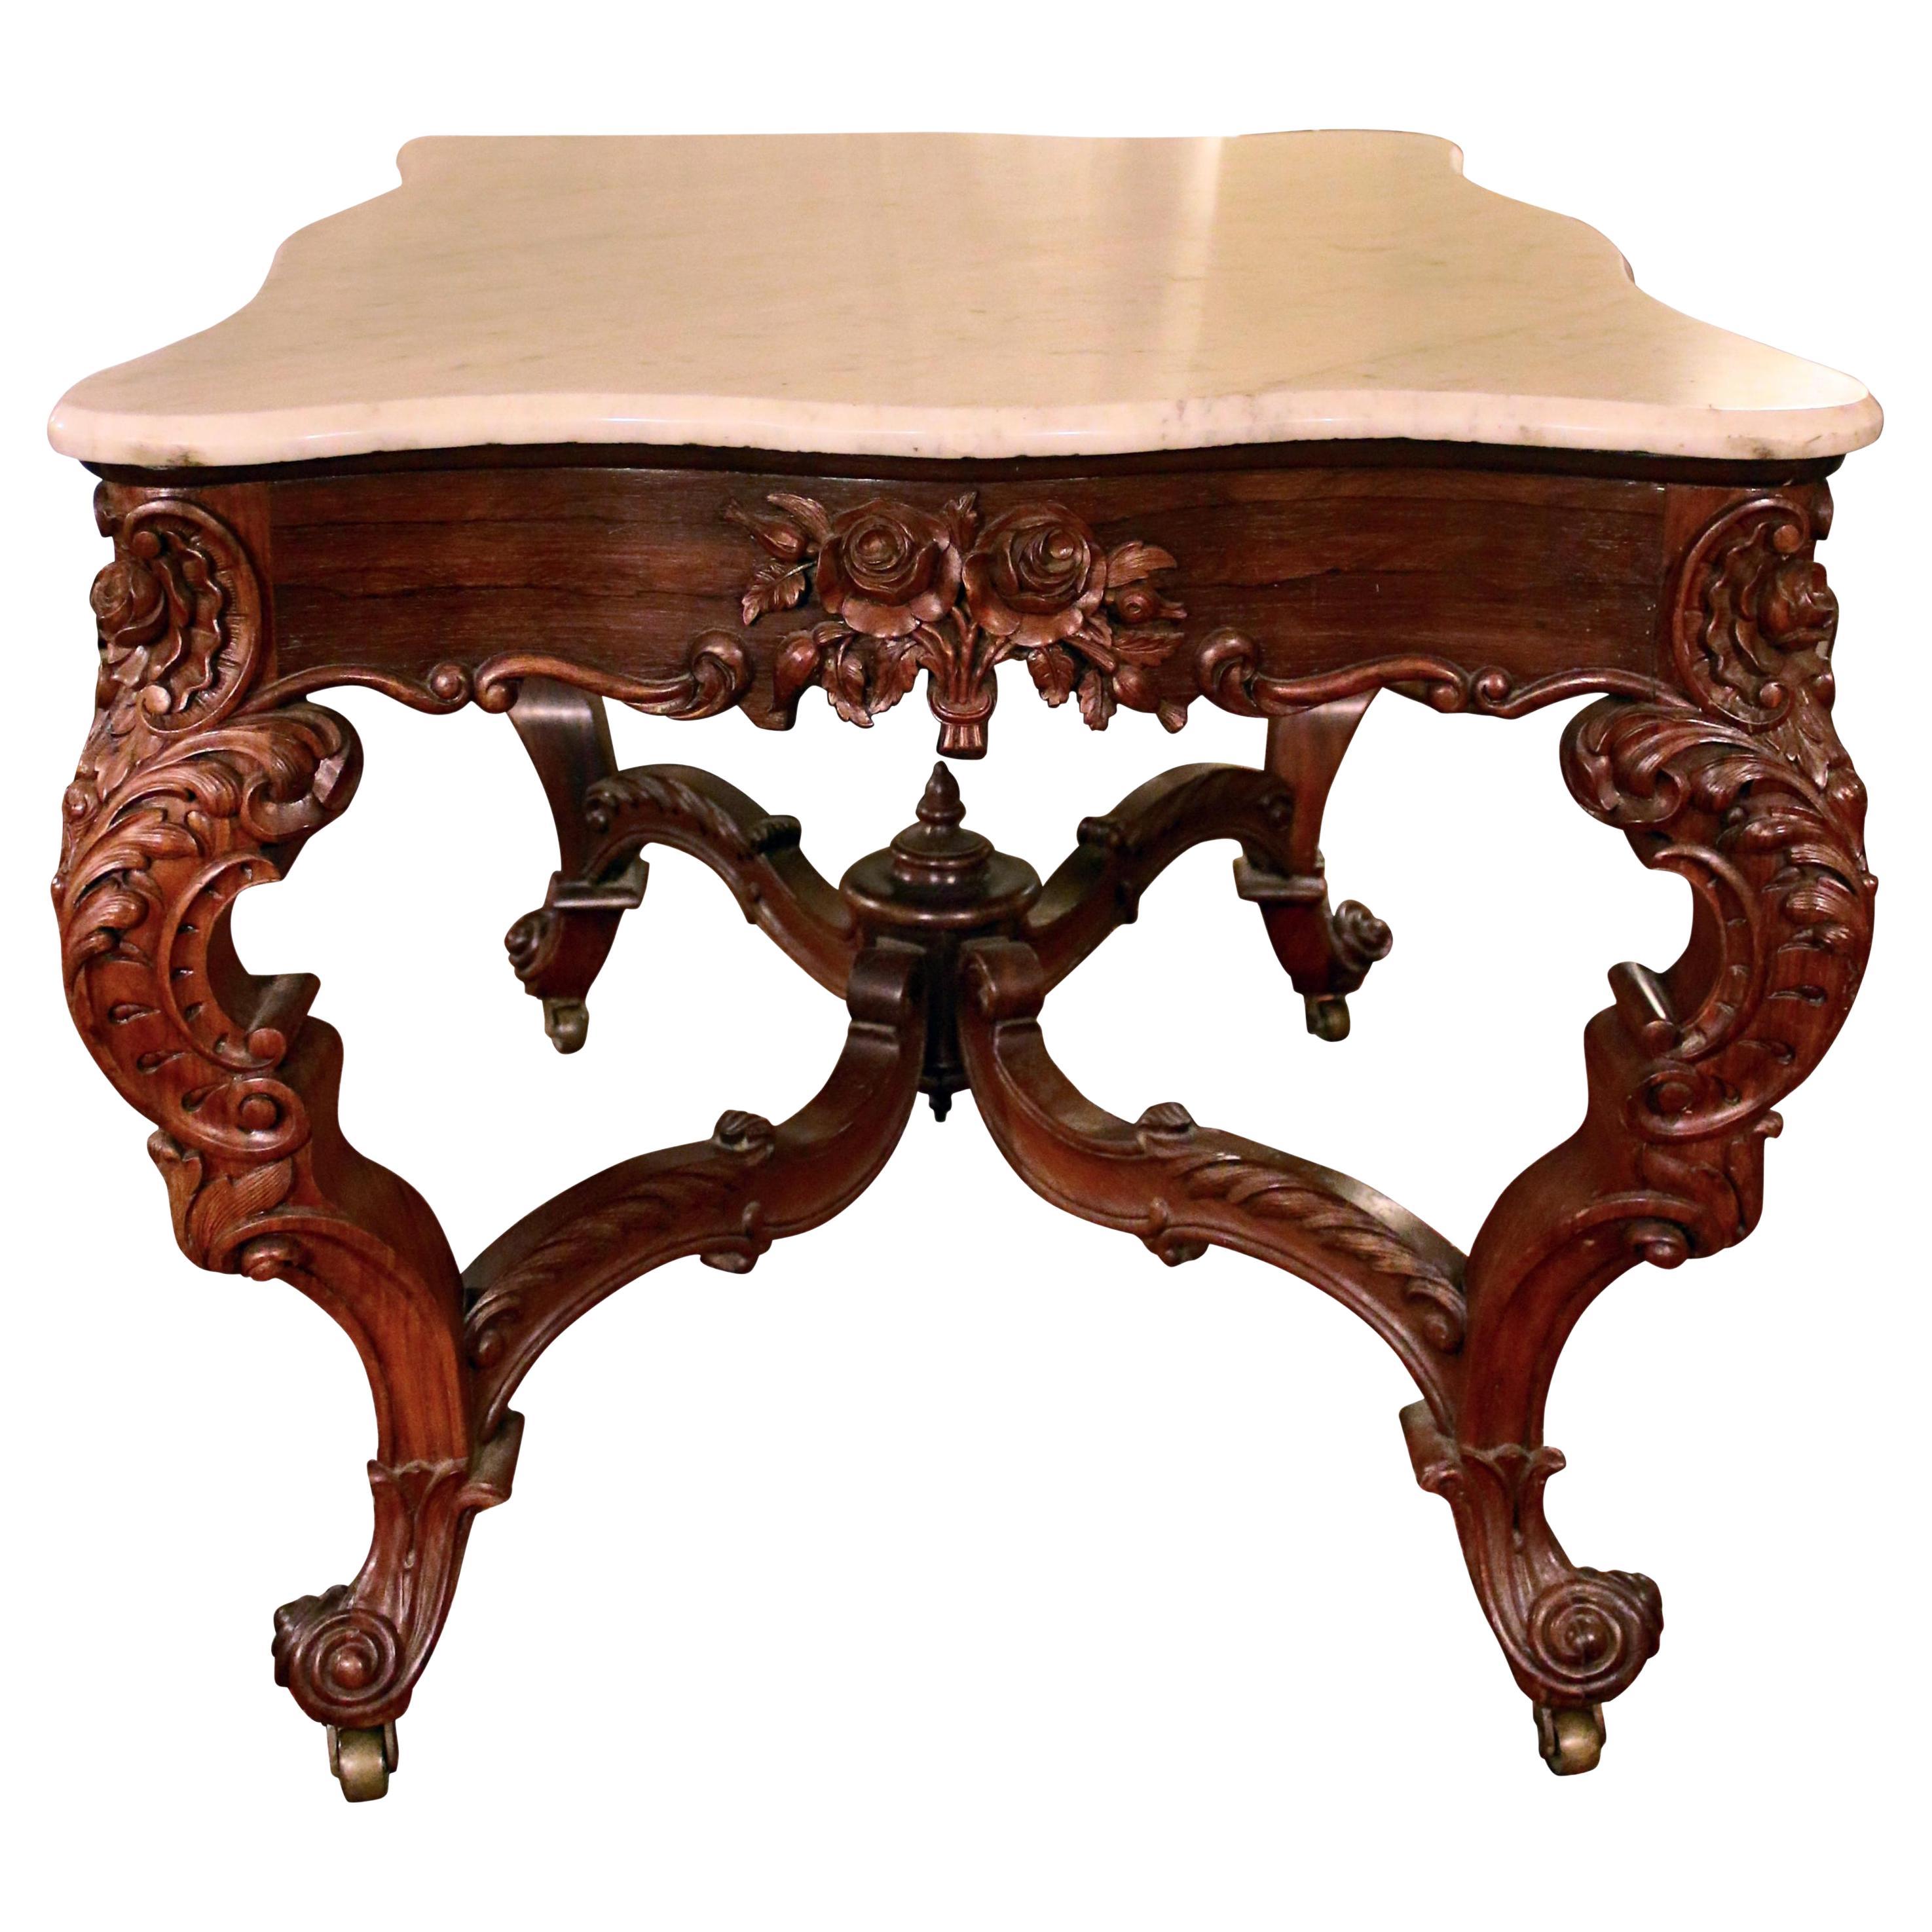 19th Century Rosewood Center Table Attributed to Joseph Meeks